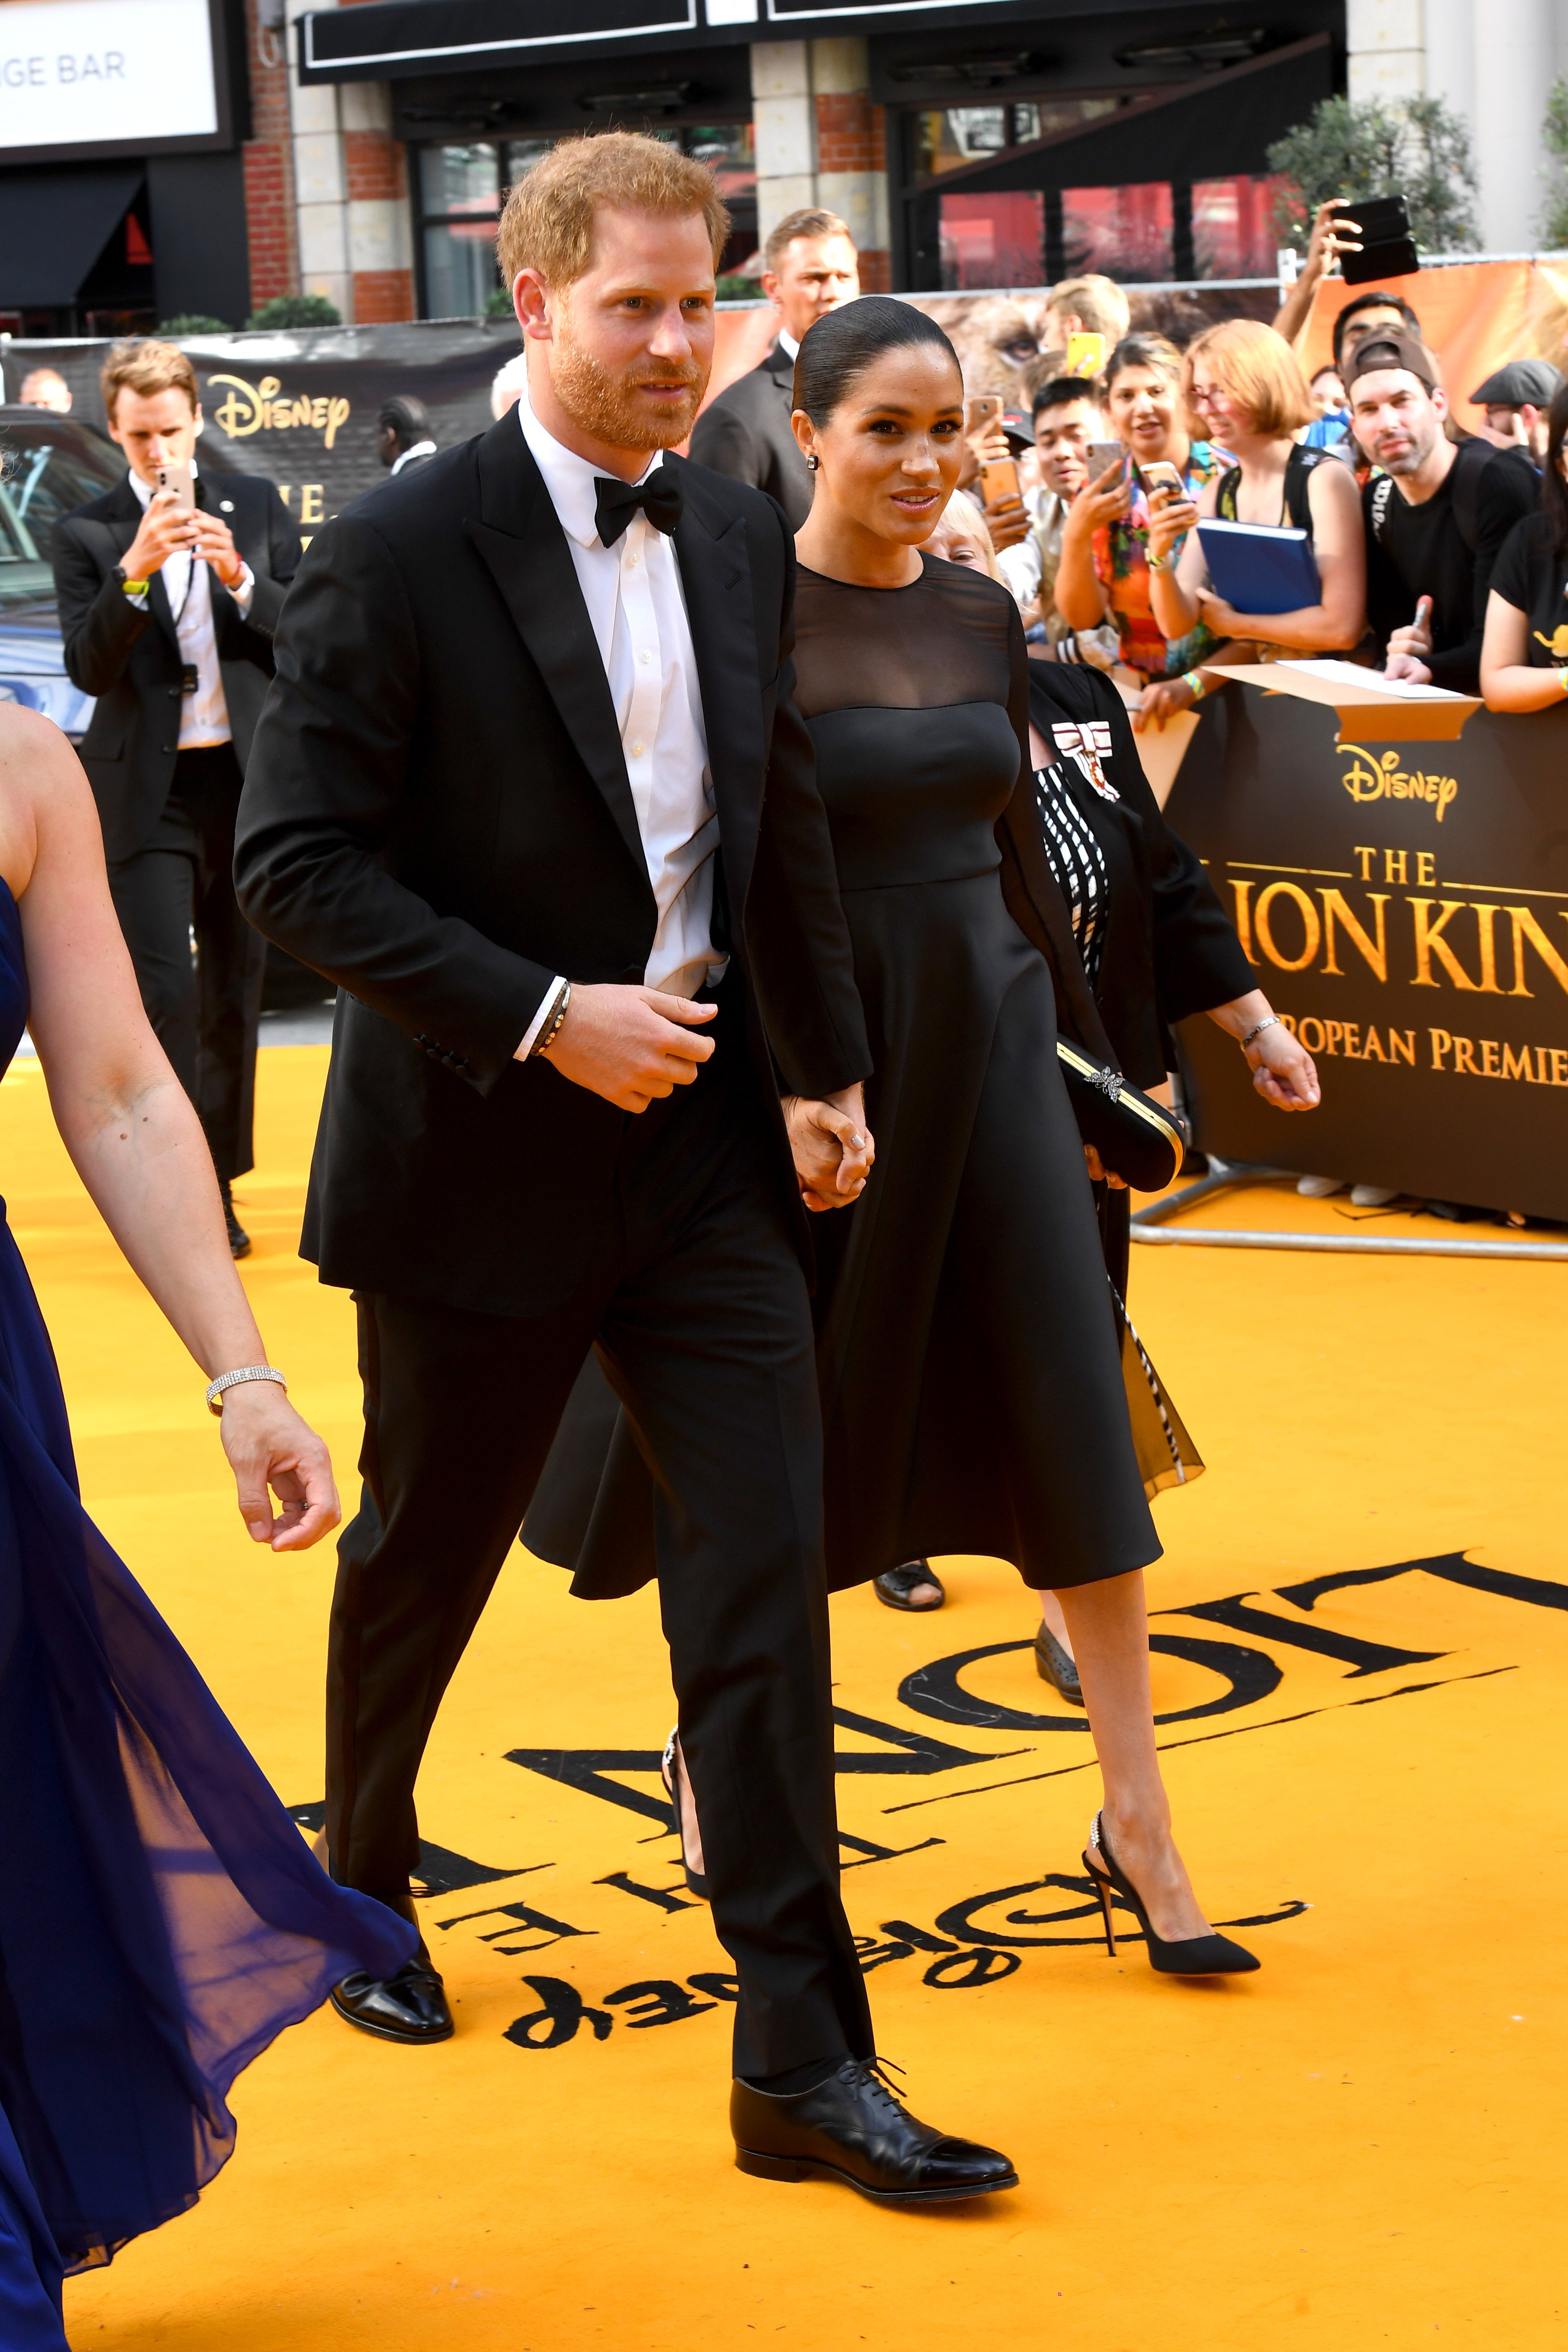 Prince Harry and Meghan Markle attend the premiere of "The Lion King" in London, England on July 14, 2019 | Photo: Getty Images